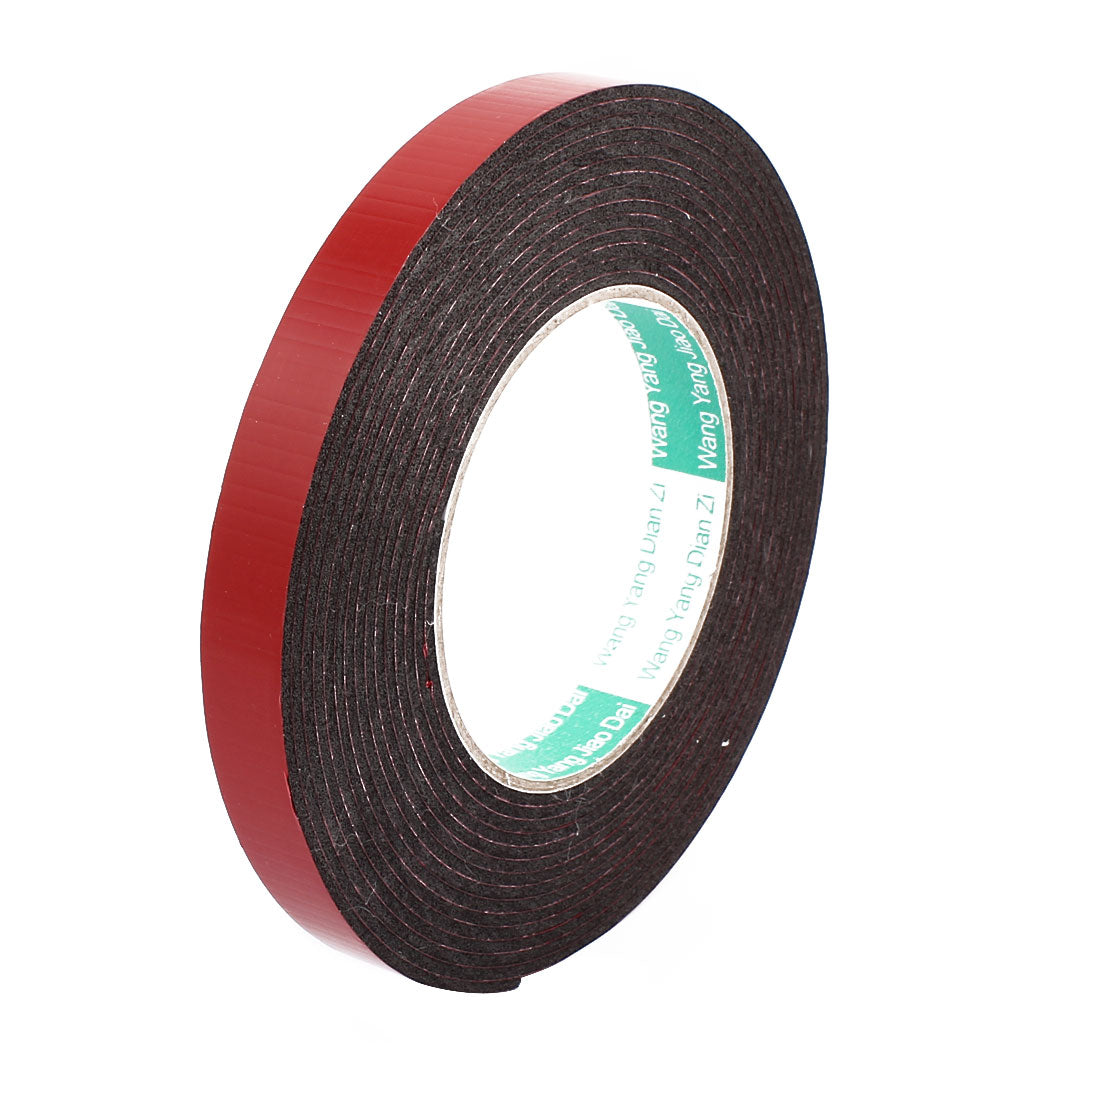 uxcell Uxcell 15mm x 2mm Car Self Adhesive Shock Resistant Foam Tape Red 5 Meters Length 2Pcs